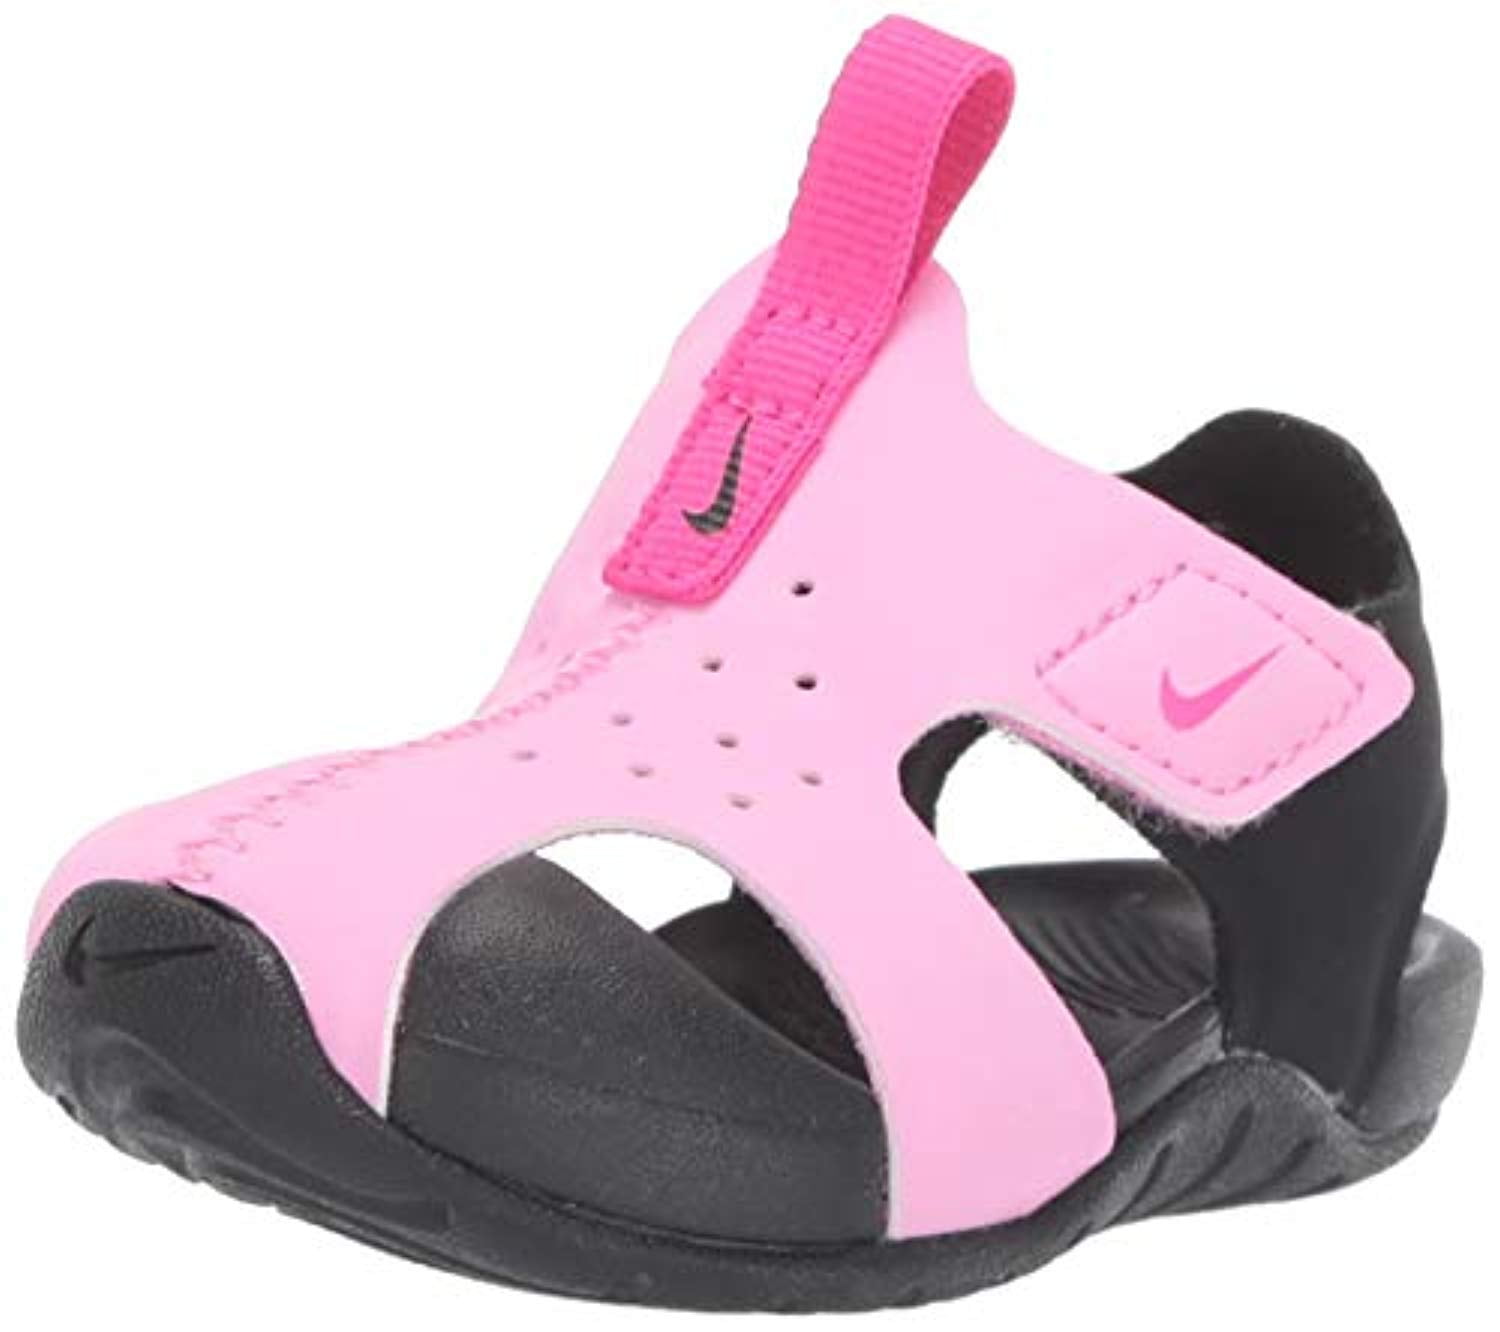 sunray protect toddler sandals